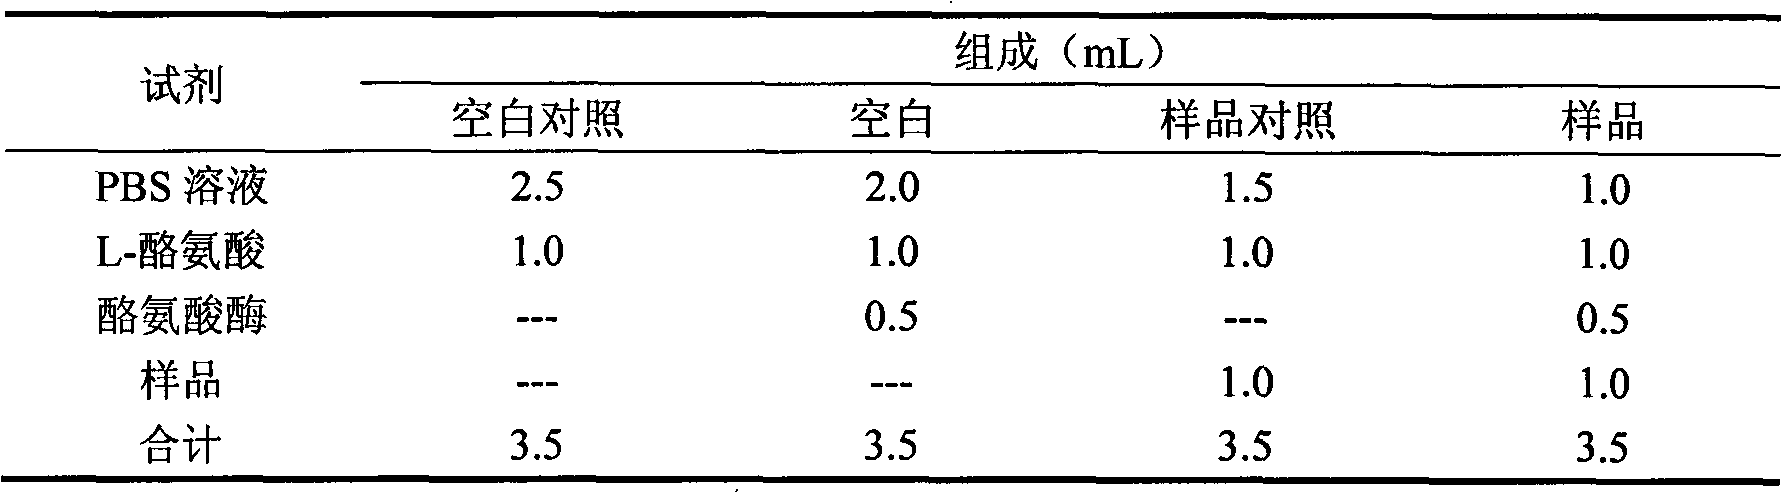 Preparation method of common bombax flower extract with whitening and anti-aging activities, and application thereof in cosmetics